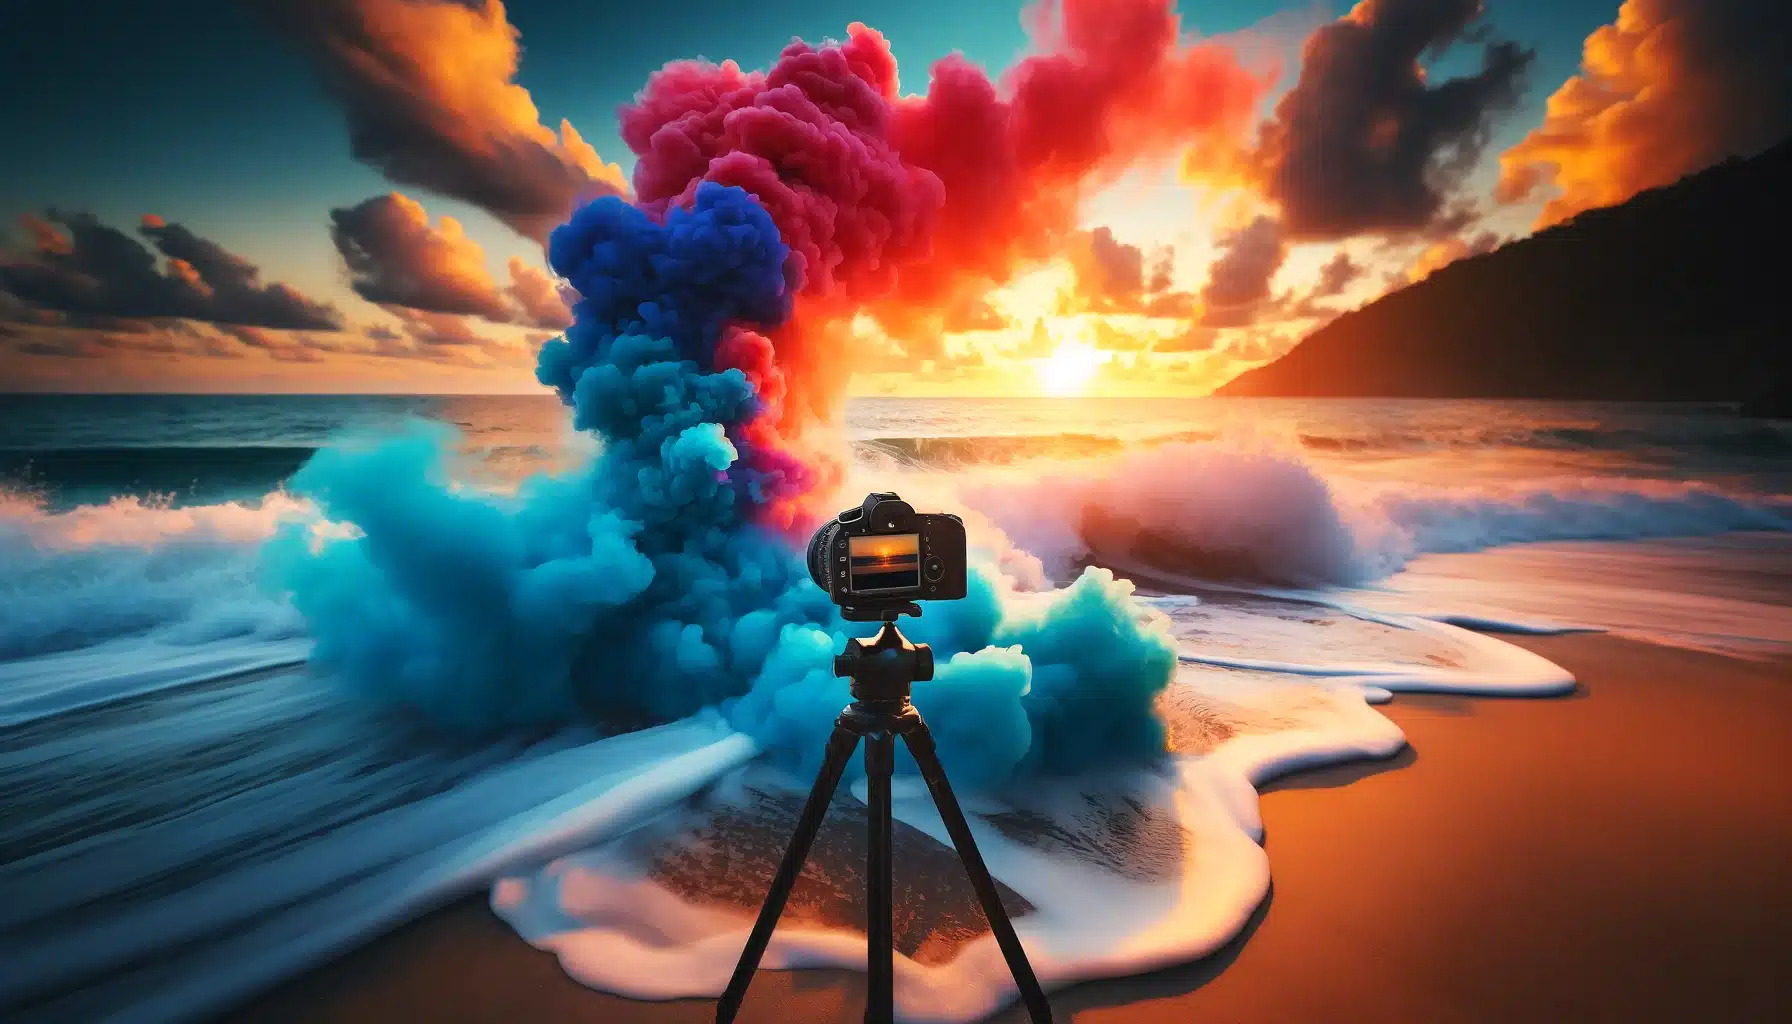 A captivating seascape photography scene at sunset, featuring a photographer using a smoke bomb to create dramatic effects, with colorful smoke swirling around the ocean waves and vibrant sky.